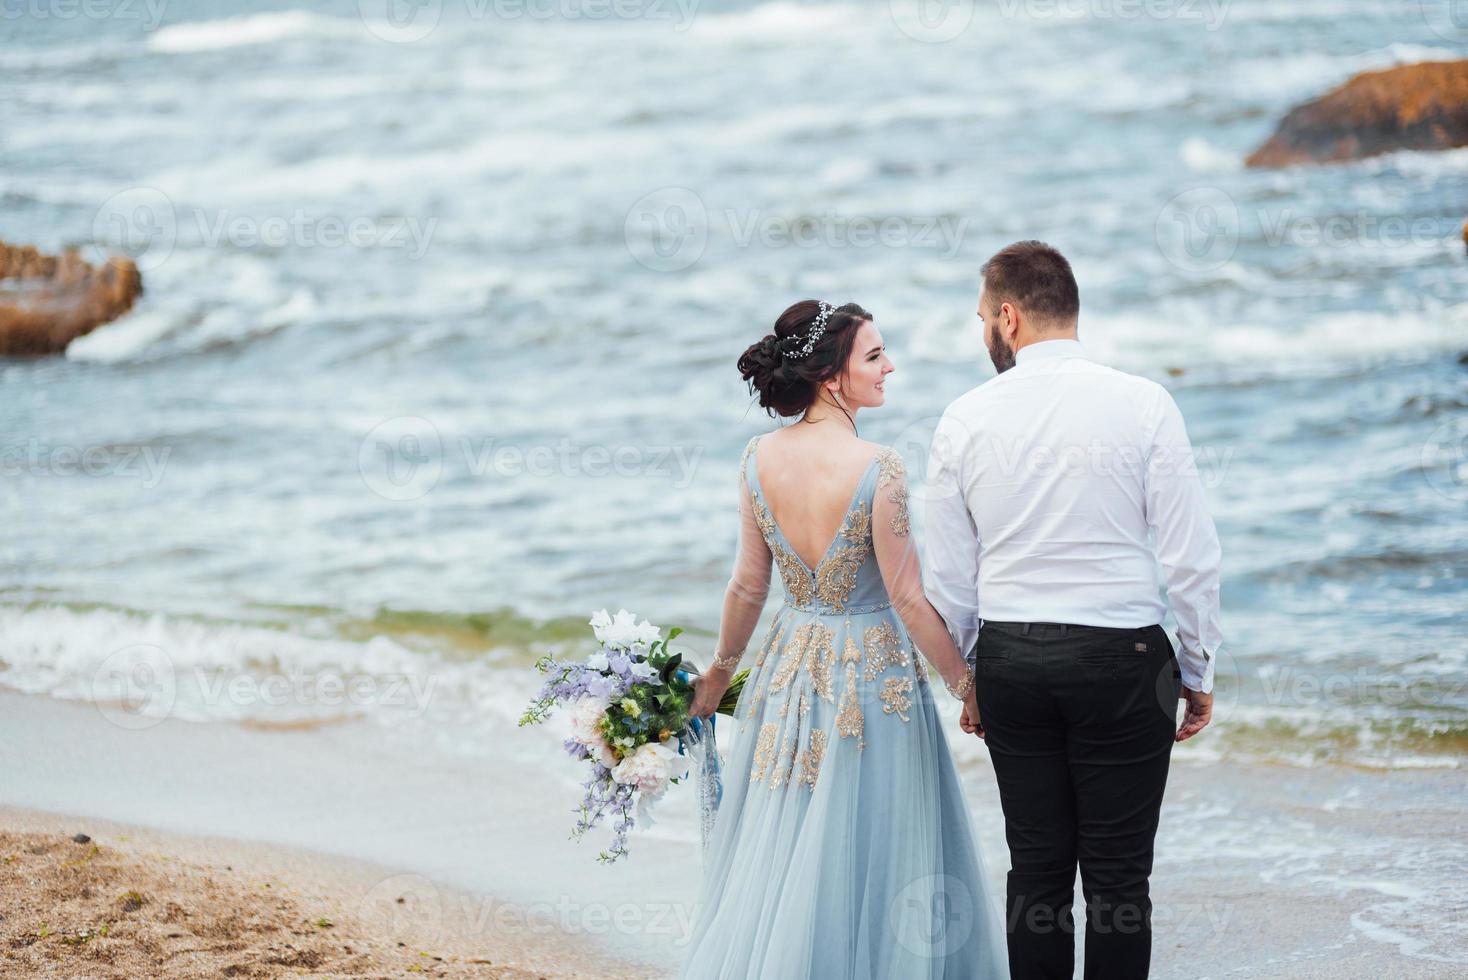 Same couple with a bride in a blue dress walk photo